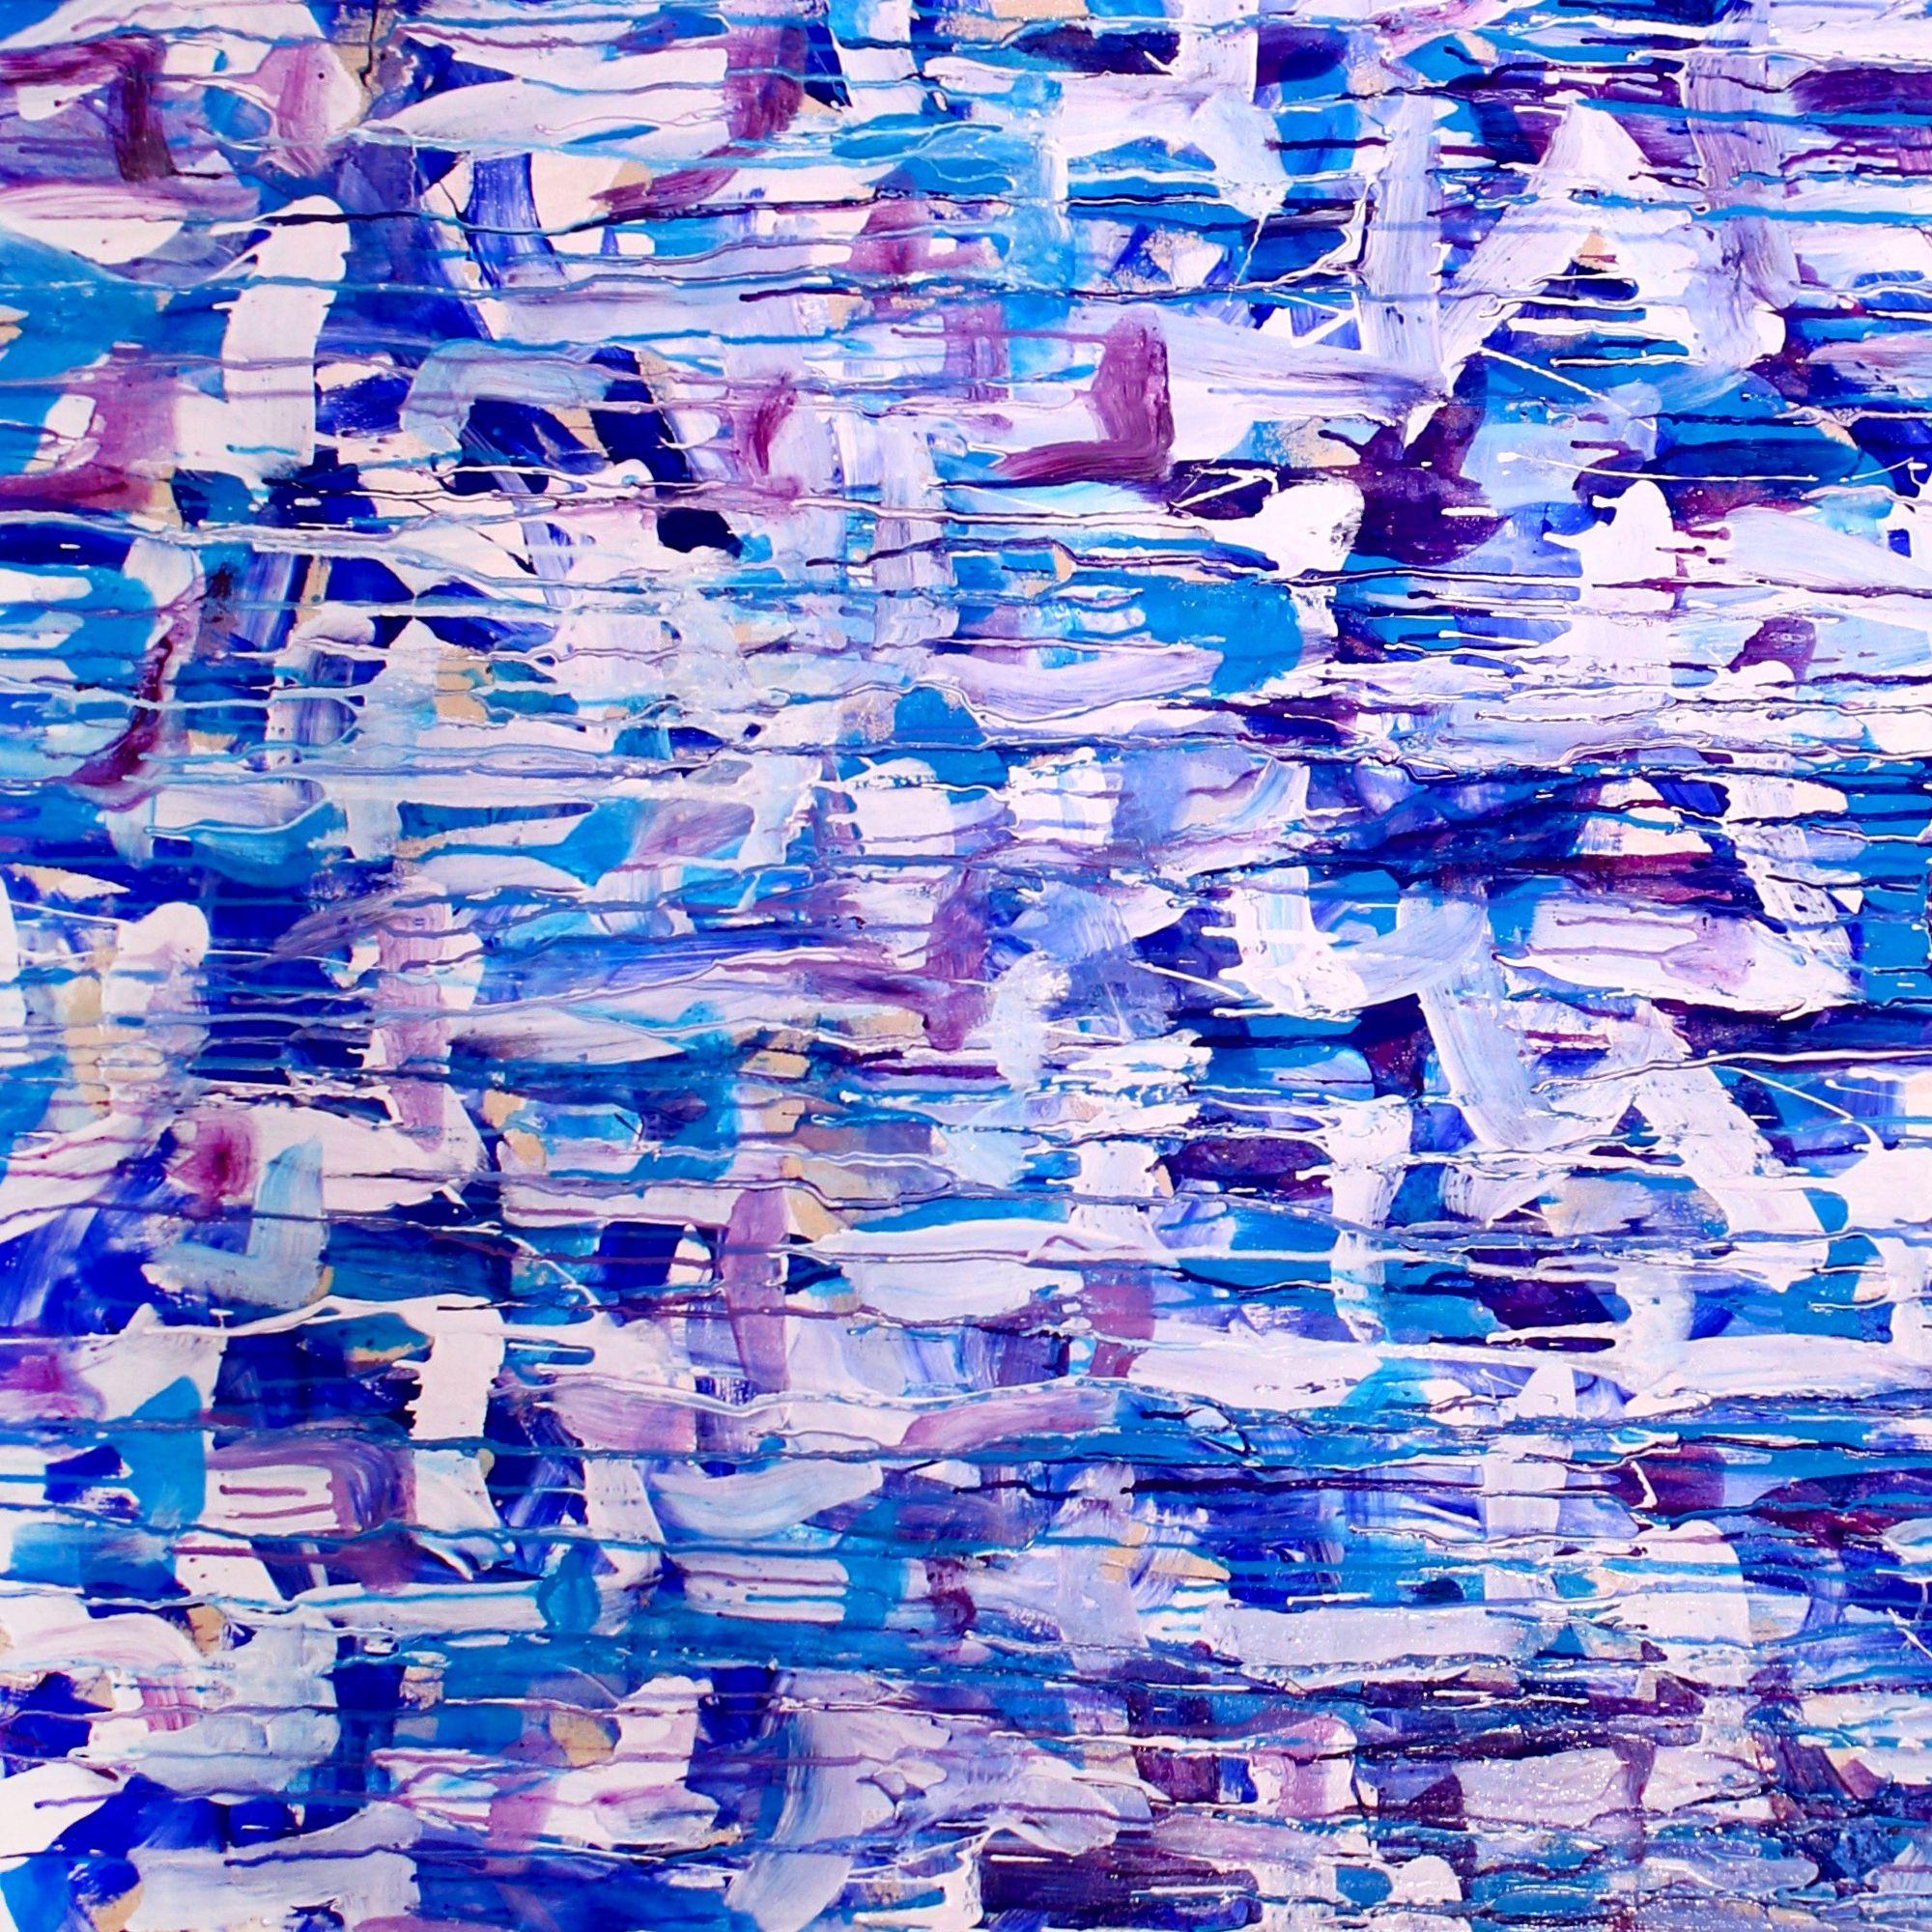 XL IMPACTFUL GESTURAL ARTWORK!     Gestural large painting with lots of brush strokes and drips of shades of blue, vivid purple, pale blue, white and gloss clear acrylic with iridescent mica particles. Impactful statement piece! Signed!     This